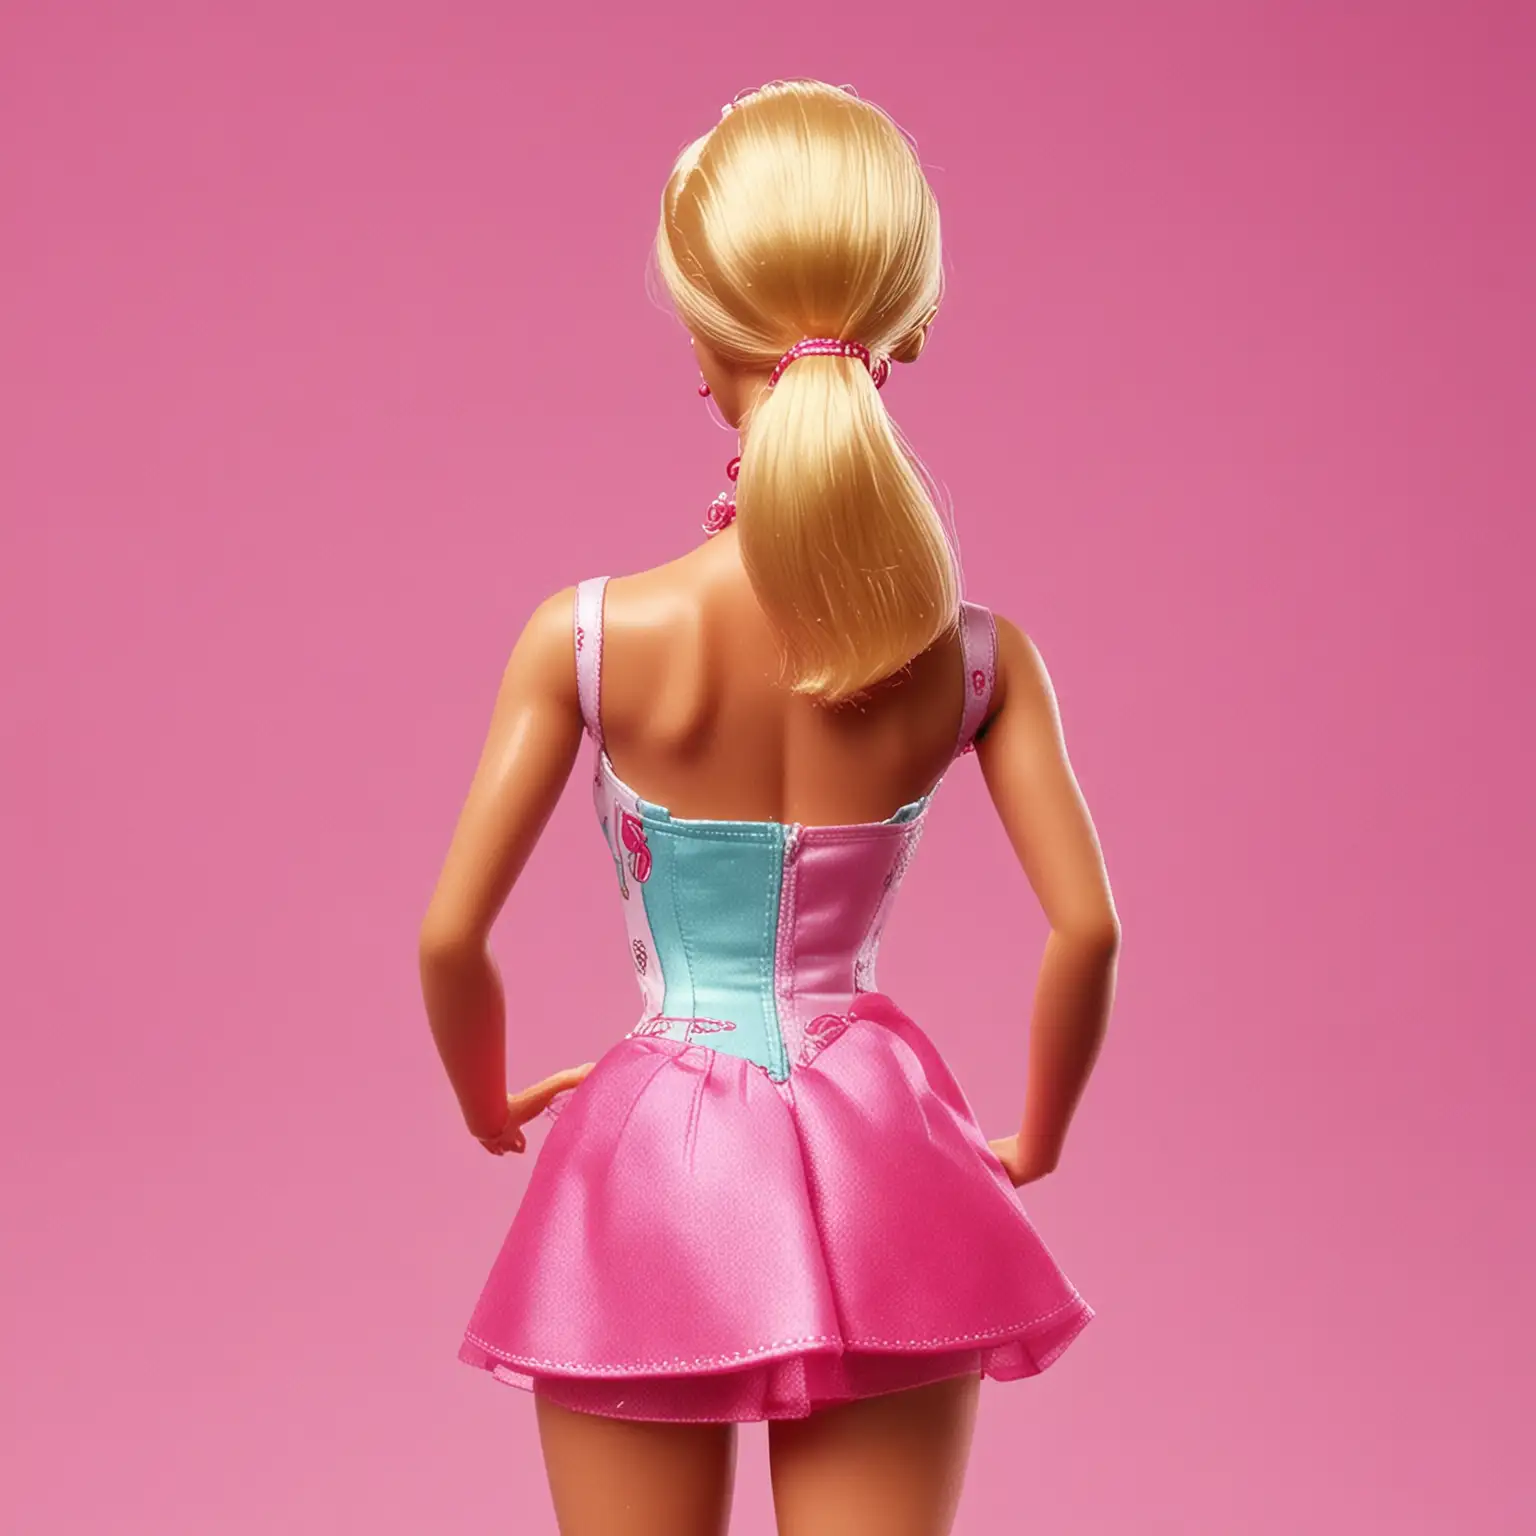 barbie from behind
